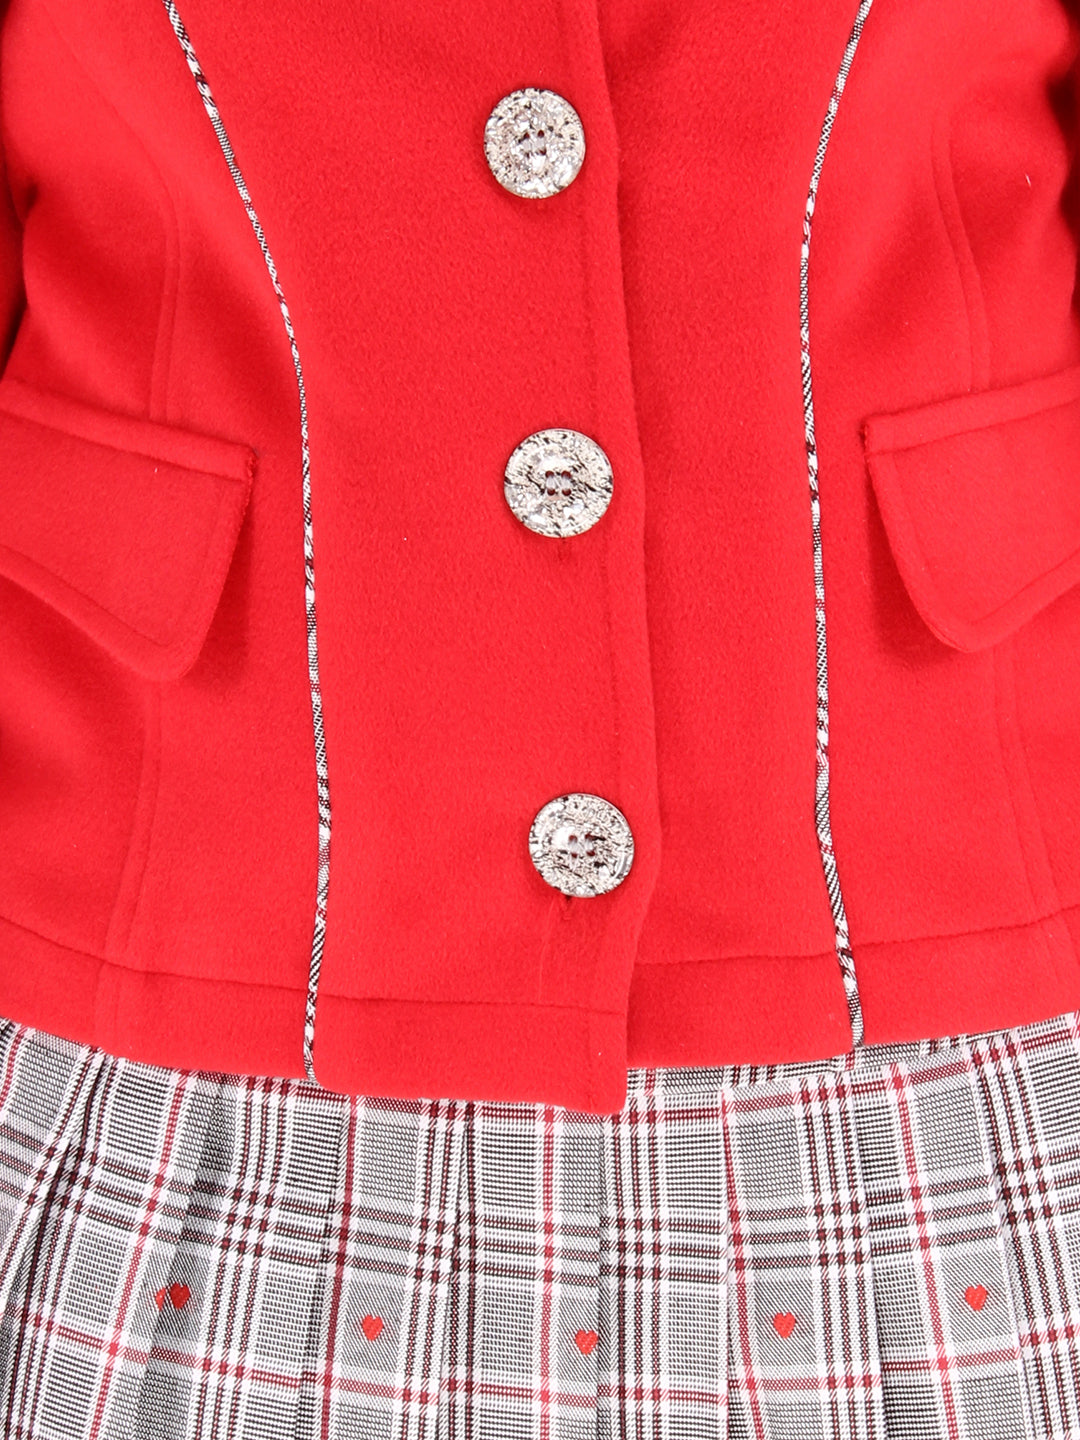 Cutecumber Girls Fleece & Check Fabric Checkered Clothing Set.Full Sleeves Collared Neck Coat with Box Pleated Skirt